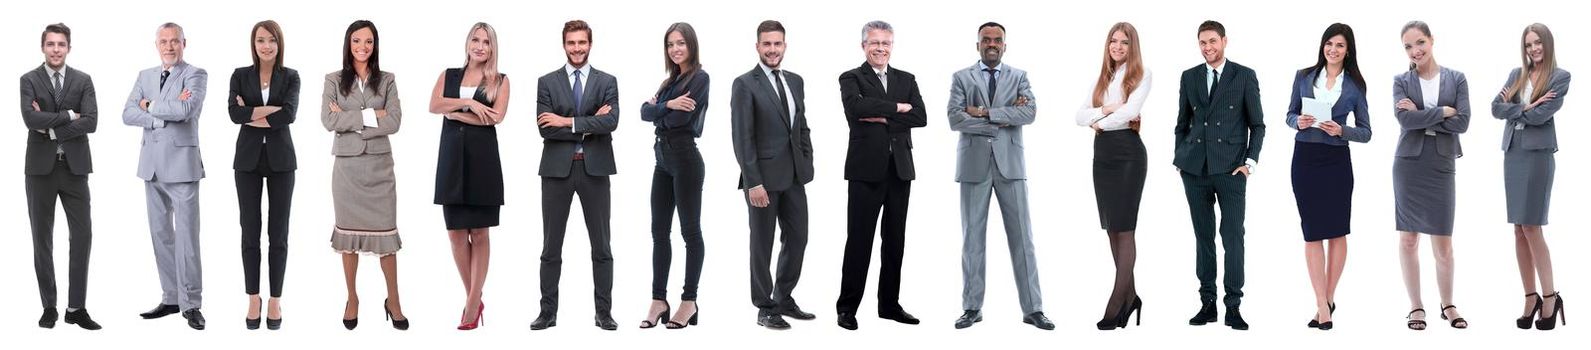 Group of smiling business people. Businessman and woman team. Isolated over white background.